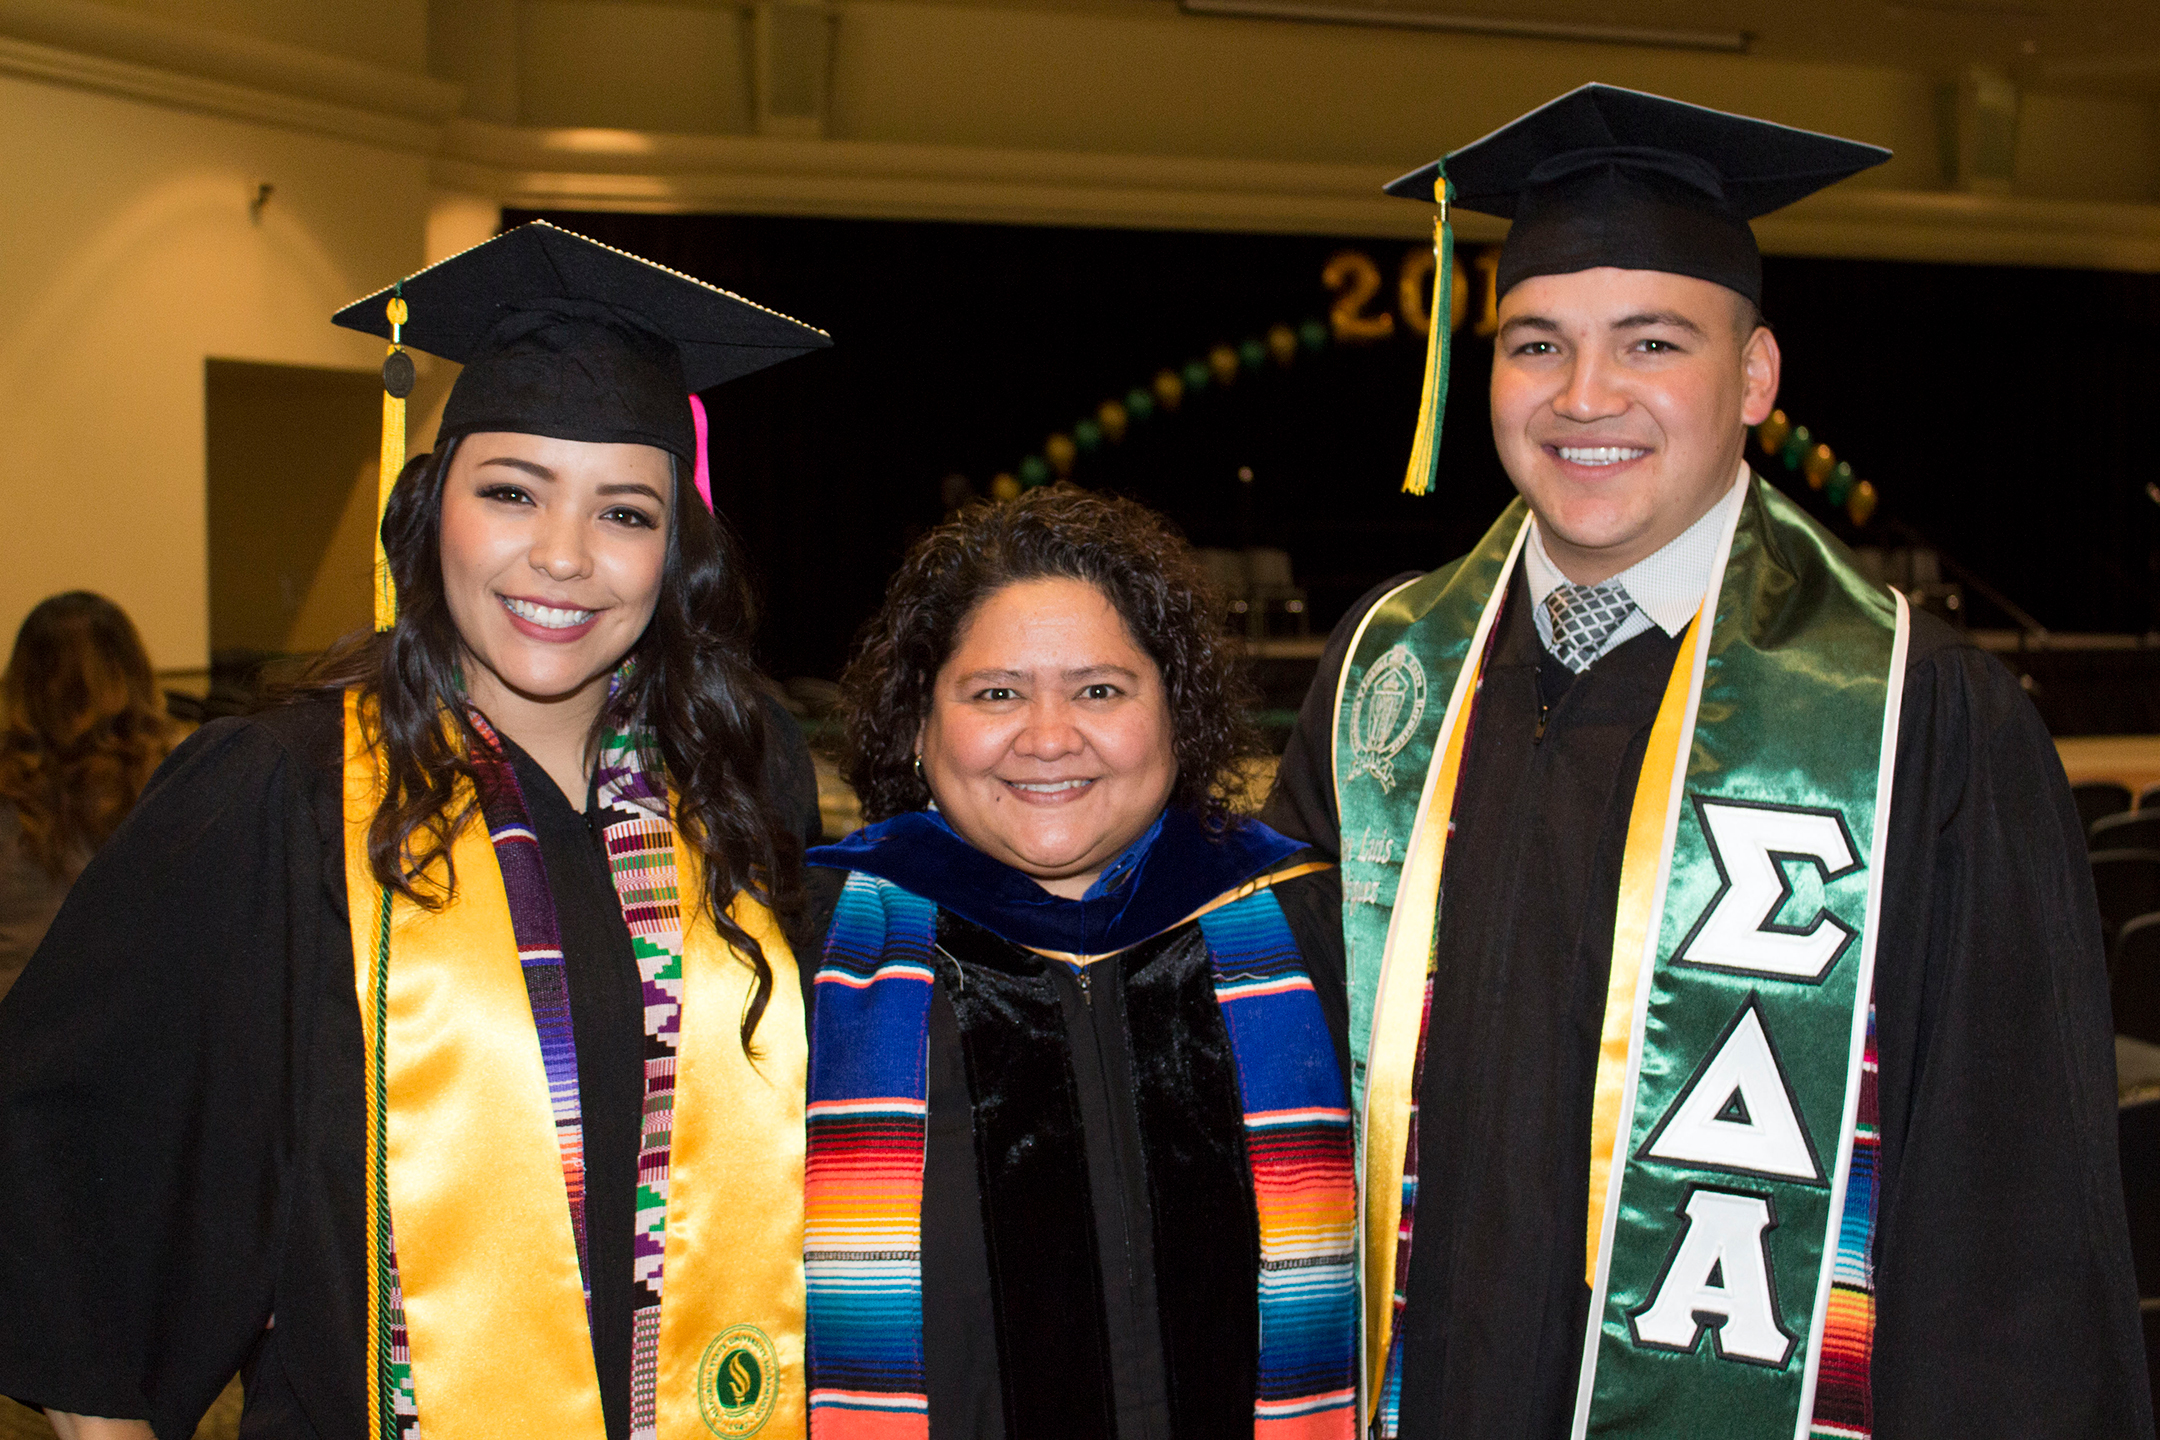 Deborah Santiago stands between two college graduates, a female on the left and a male on the right, after a graduation ceremony